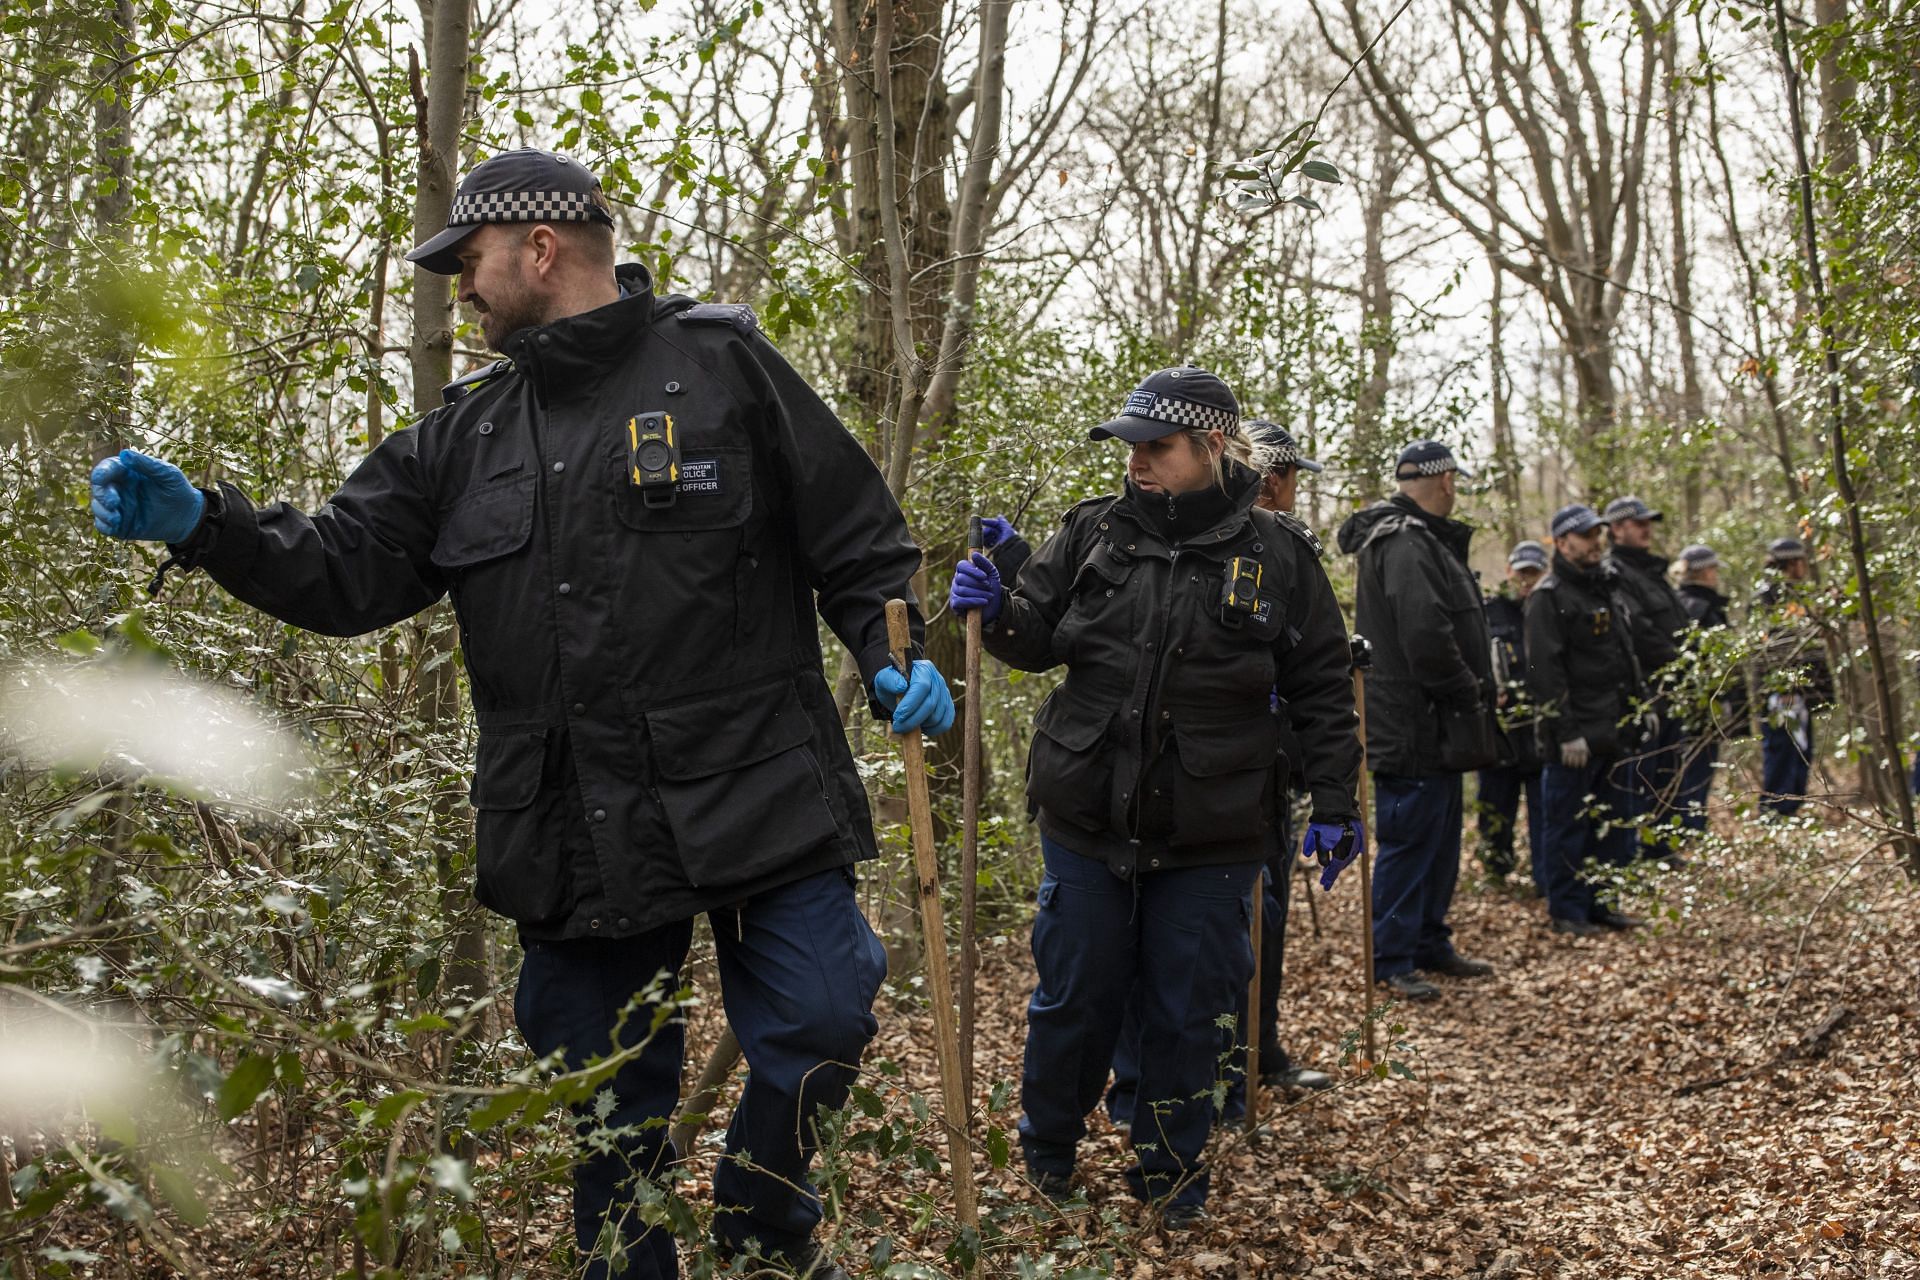 A representative image of Woodland, from where Emma&#039;s body was recovered (Image via Getty)